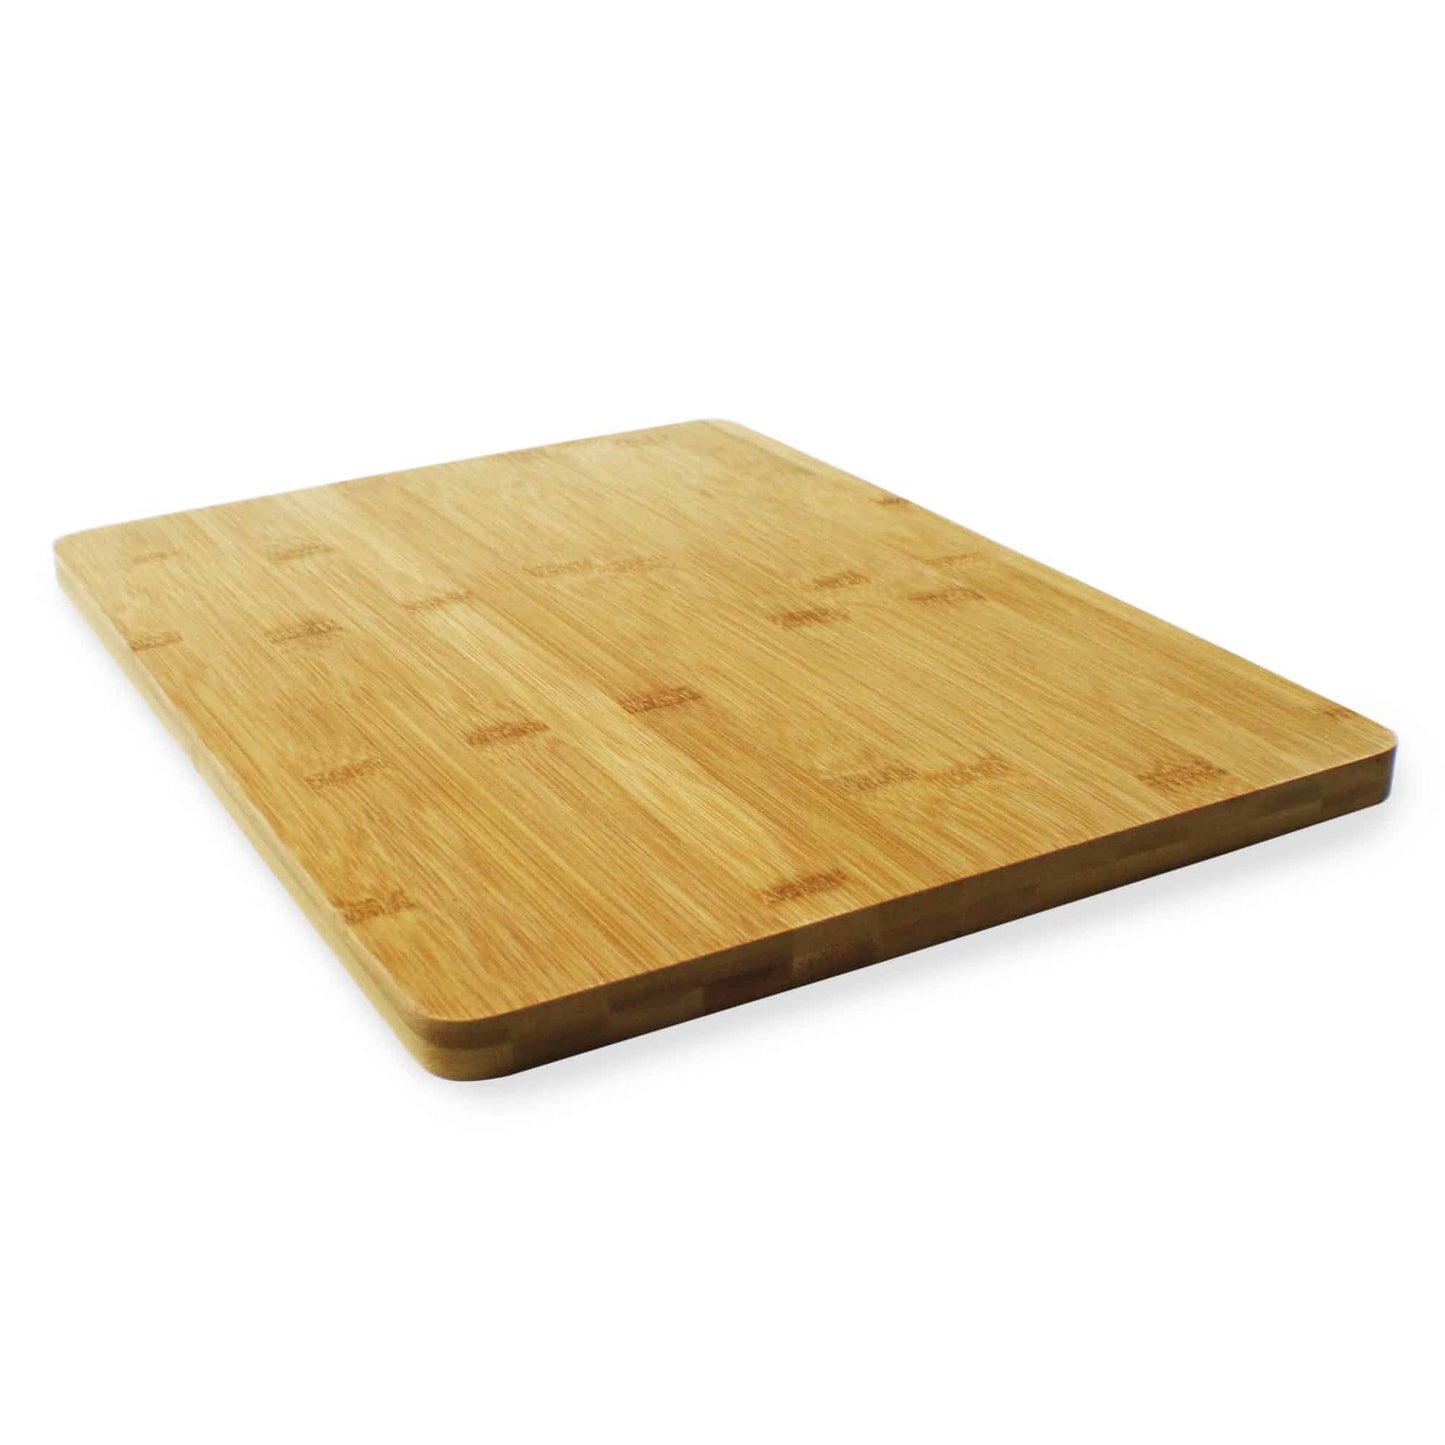 Peace Love Joy Wooden Engraved Chopping Board for Christmas New Year